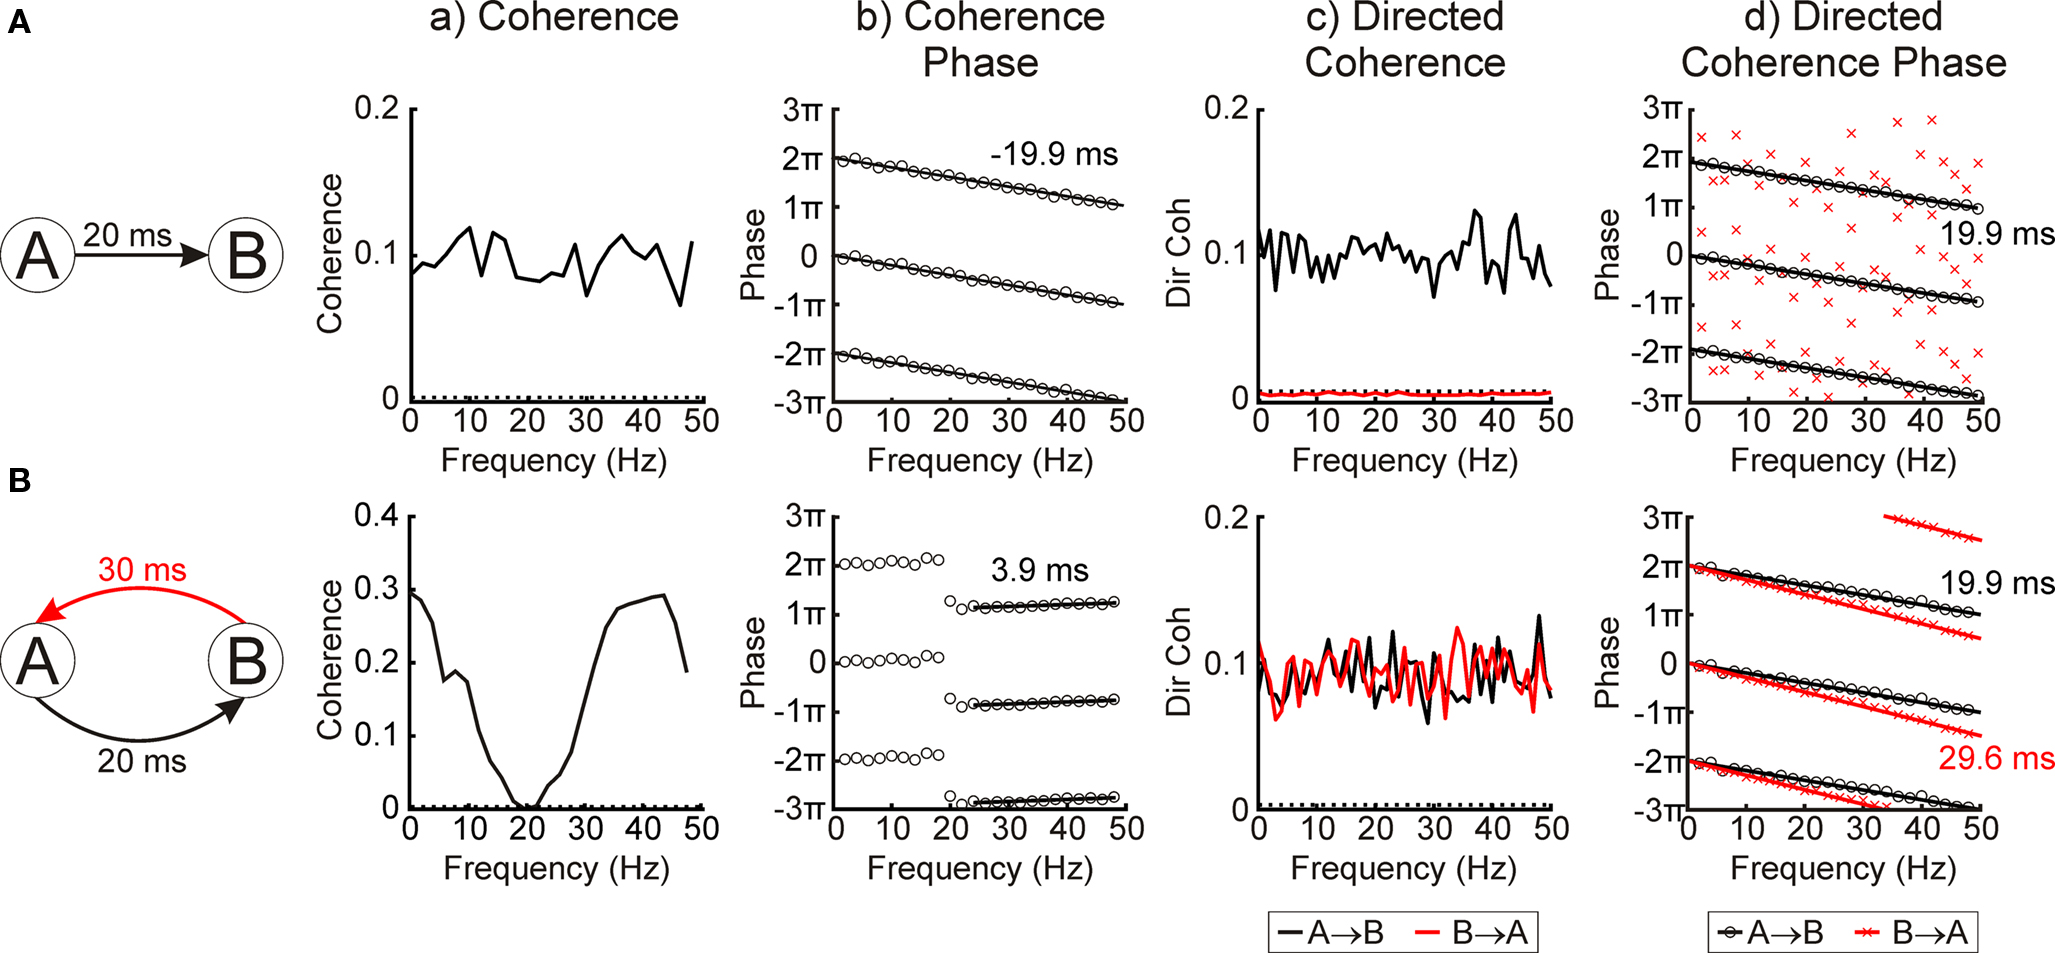 cache coherence cortex a9